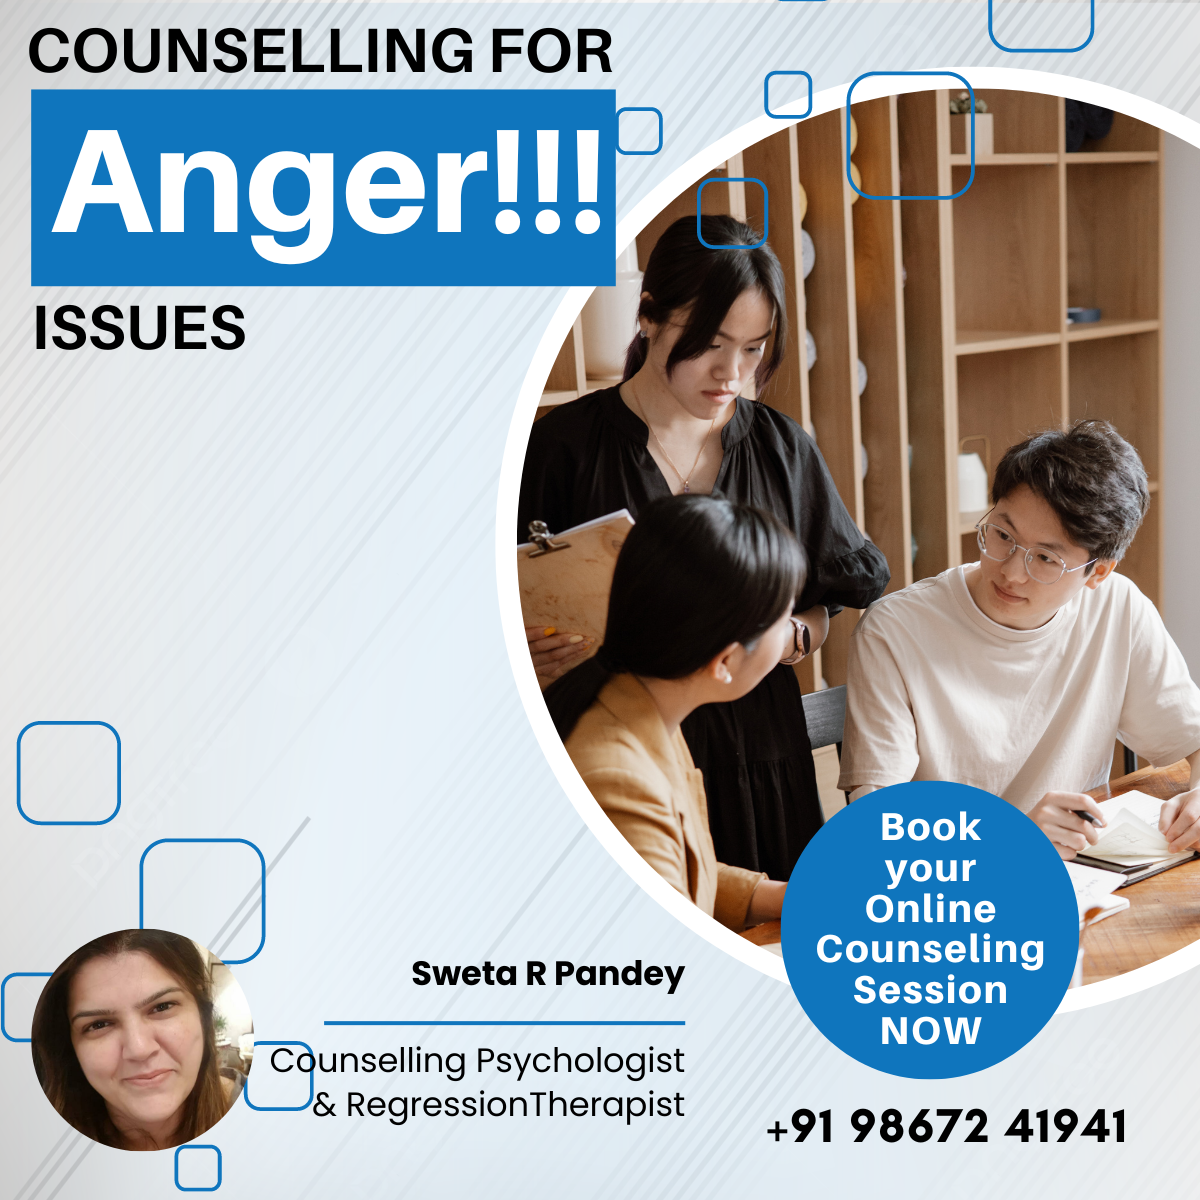 Counselling for Anger Issues - Sweta R Pandey - Kanpur